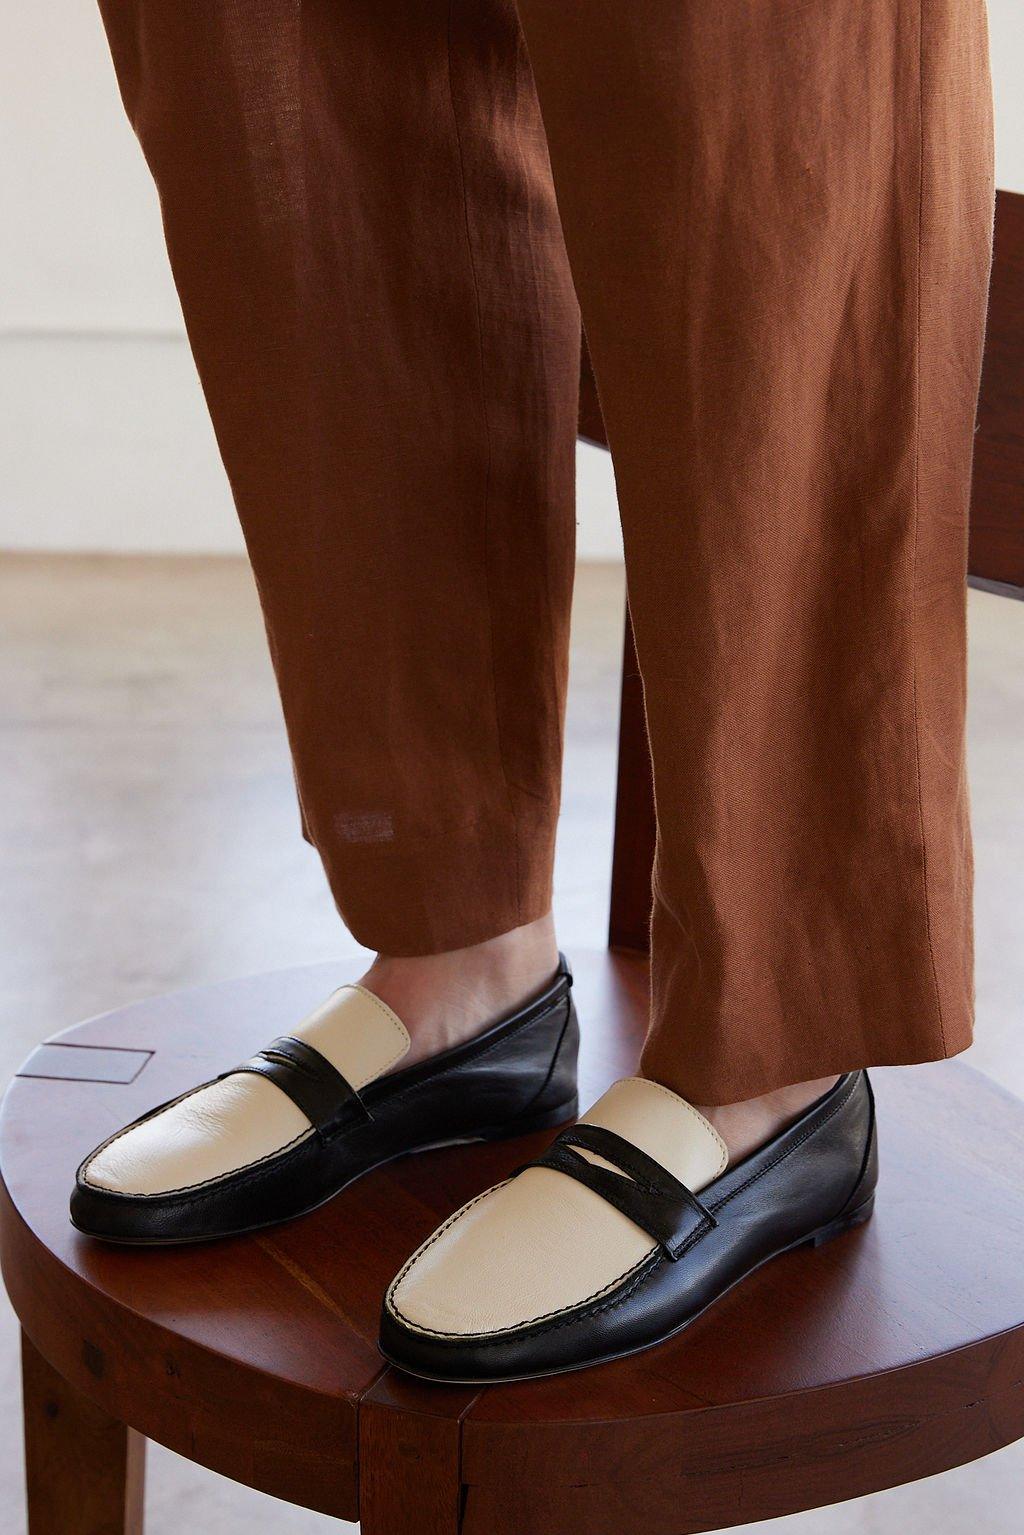 The Two Tone Penny Loafer